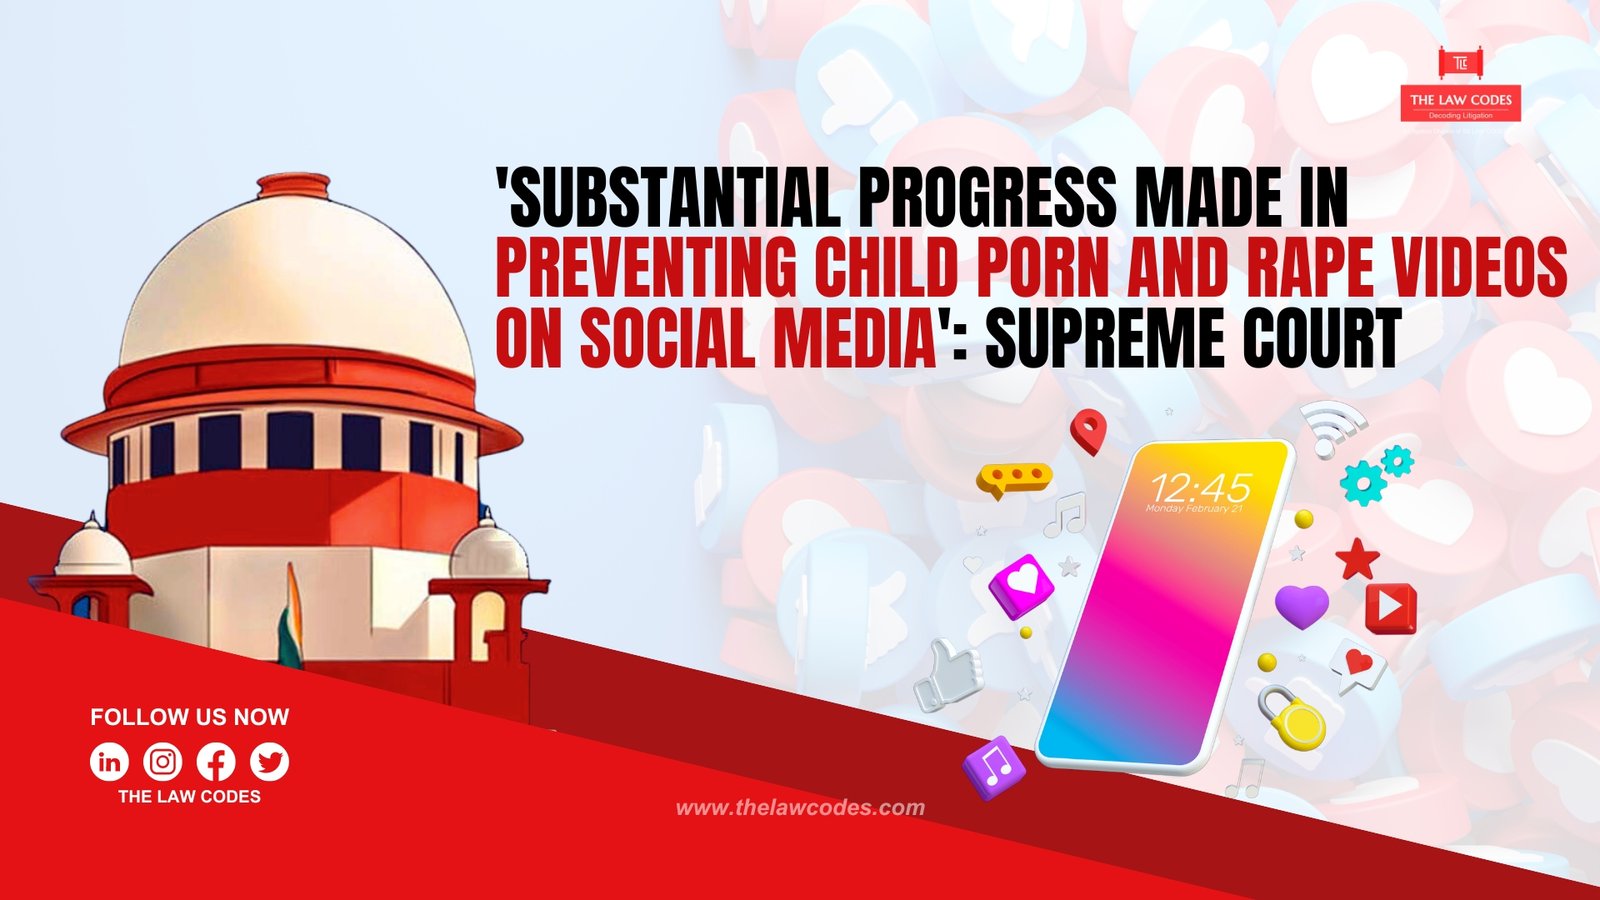 'Substantial Progress Made in Preventing Child Porn and Rape Videos On Social Media' Supreme Court